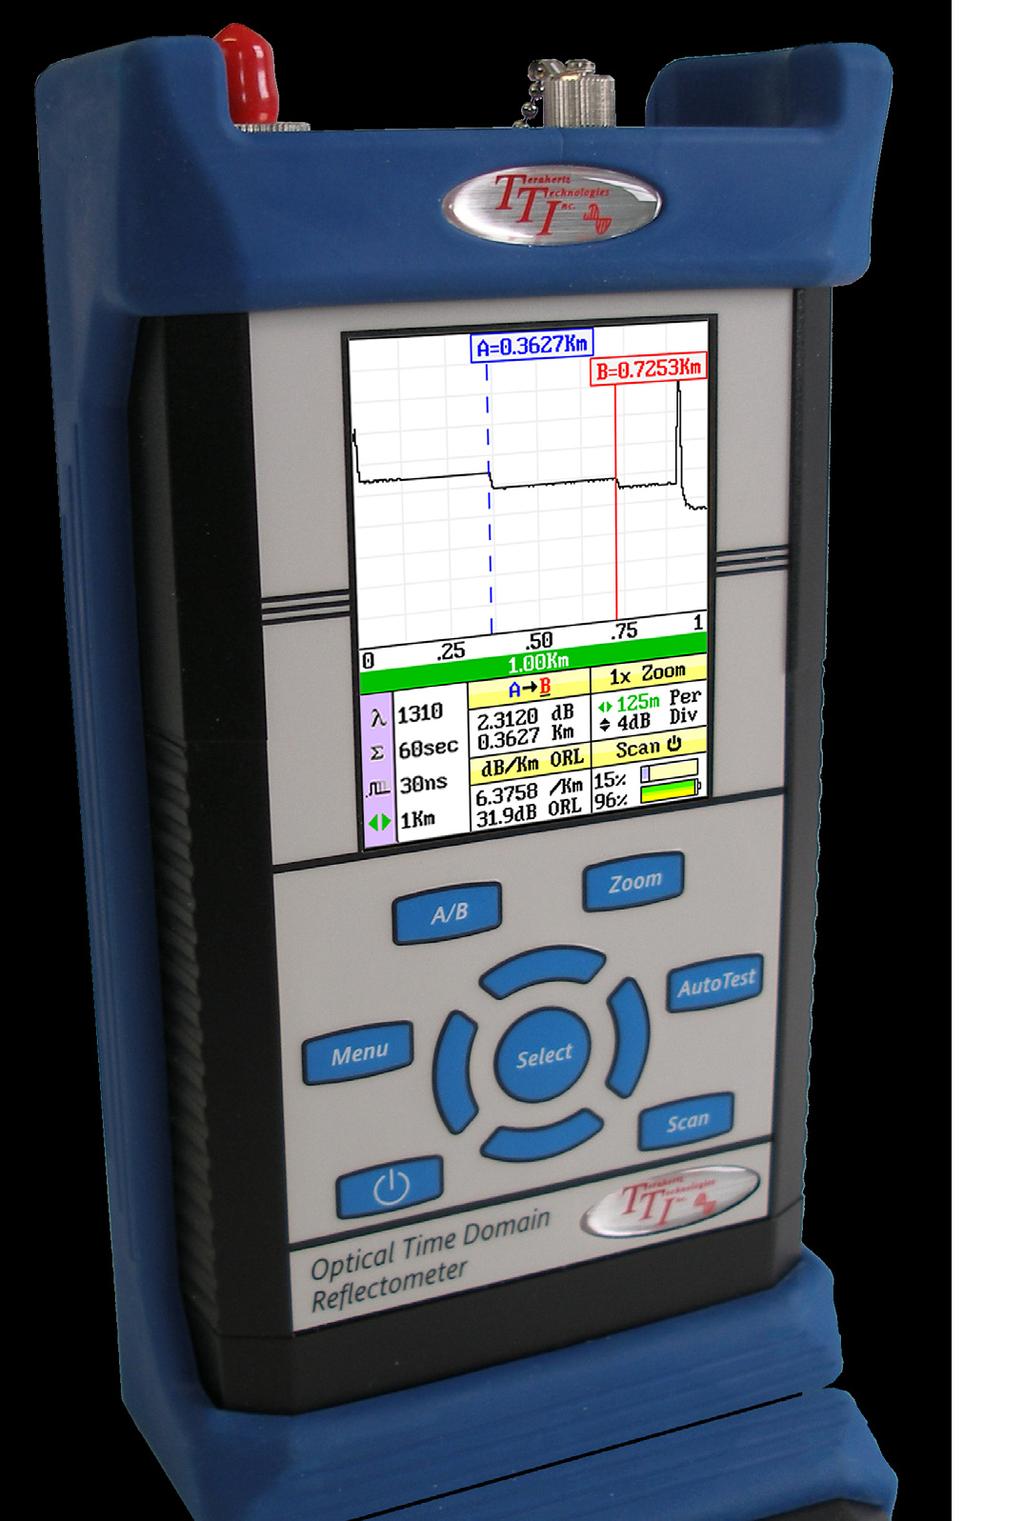 FTE-7000A OTDR Available in a Variety of Models The FTE-7000A is available in a wide variety of models.